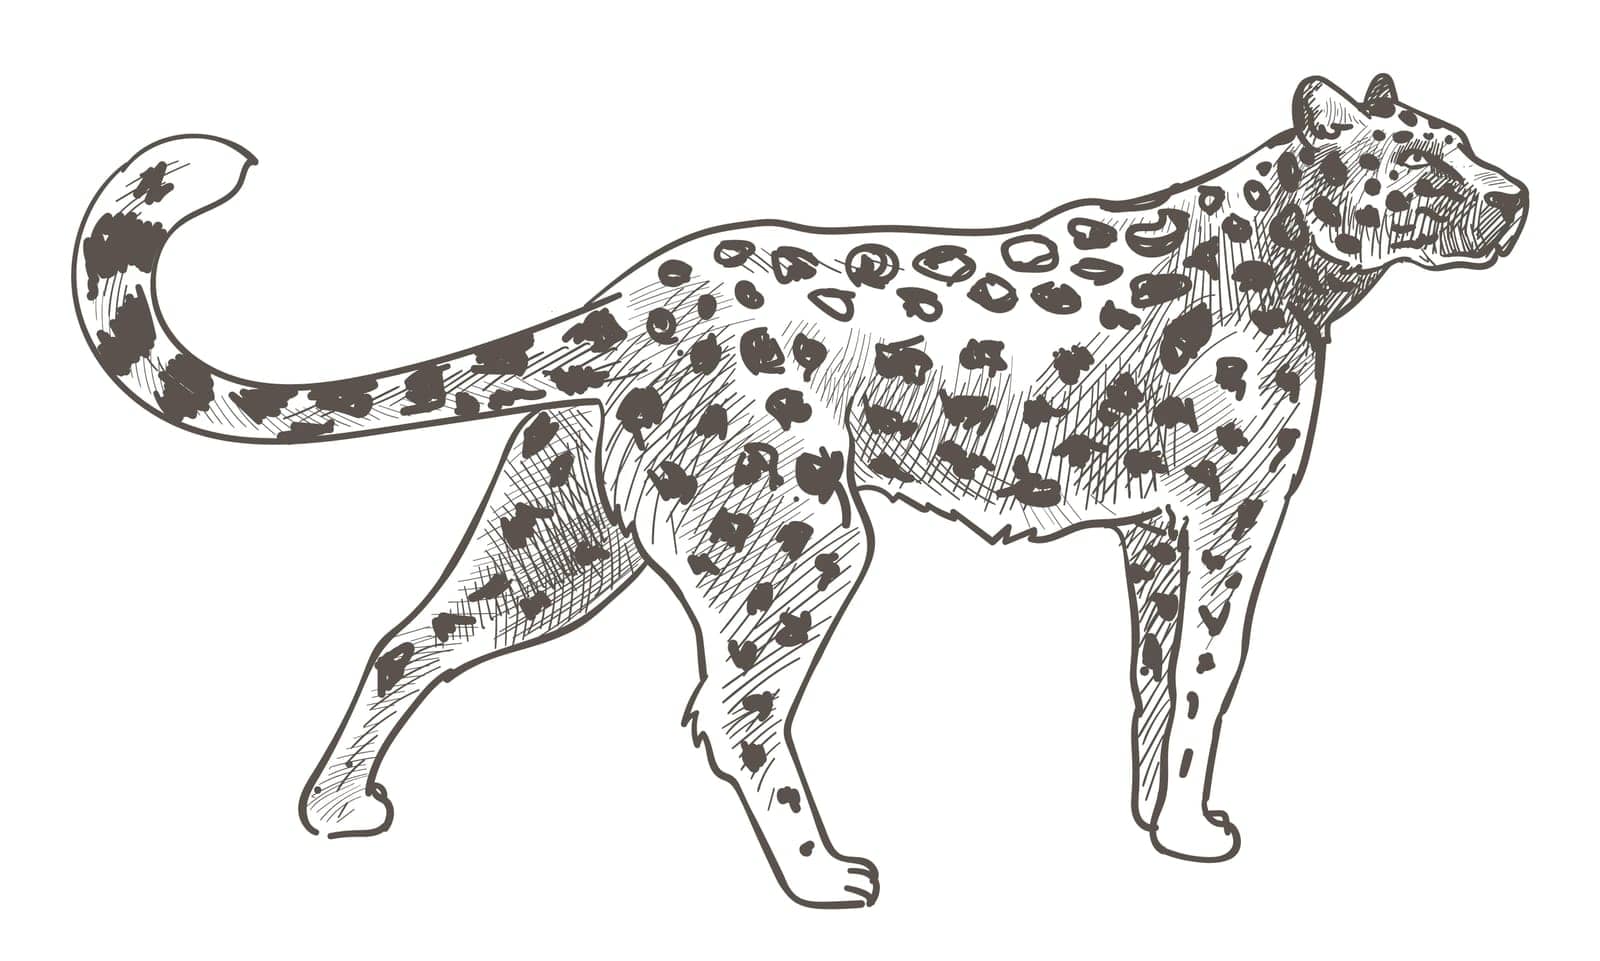 Wild life animal, isolated leopard with spotted furry coat. Jaguar or panther walking. Mammal in motion. Predator feline cat, carnivore hunter. Monochrome sketch outline, vector in flat style